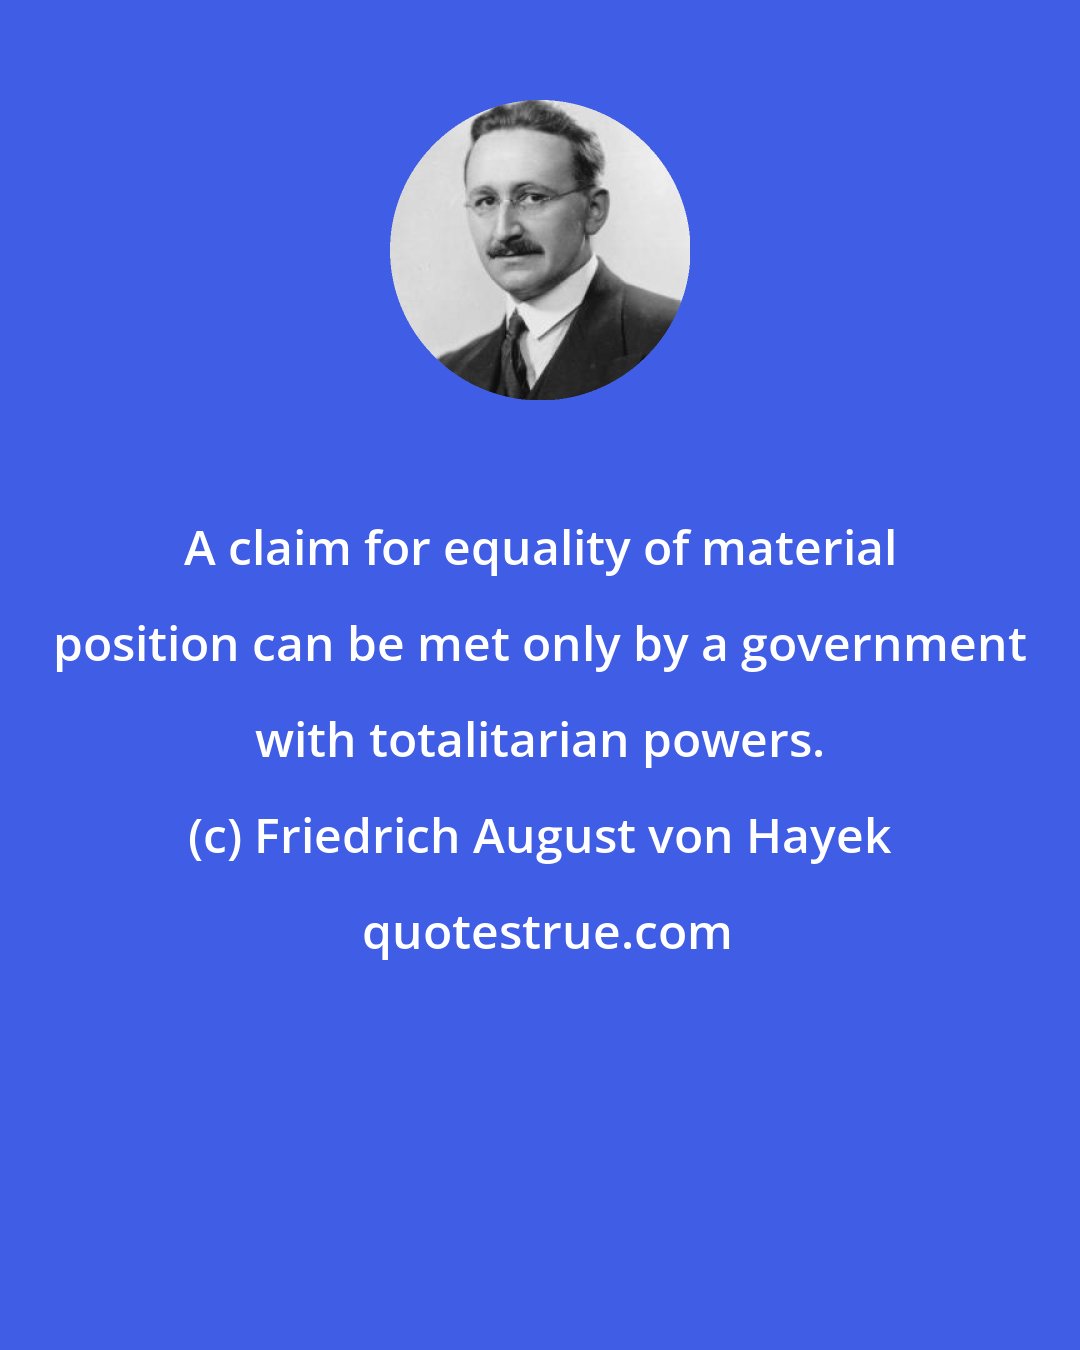 Friedrich August von Hayek: A claim for equality of material position can be met only by a government with totalitarian powers.